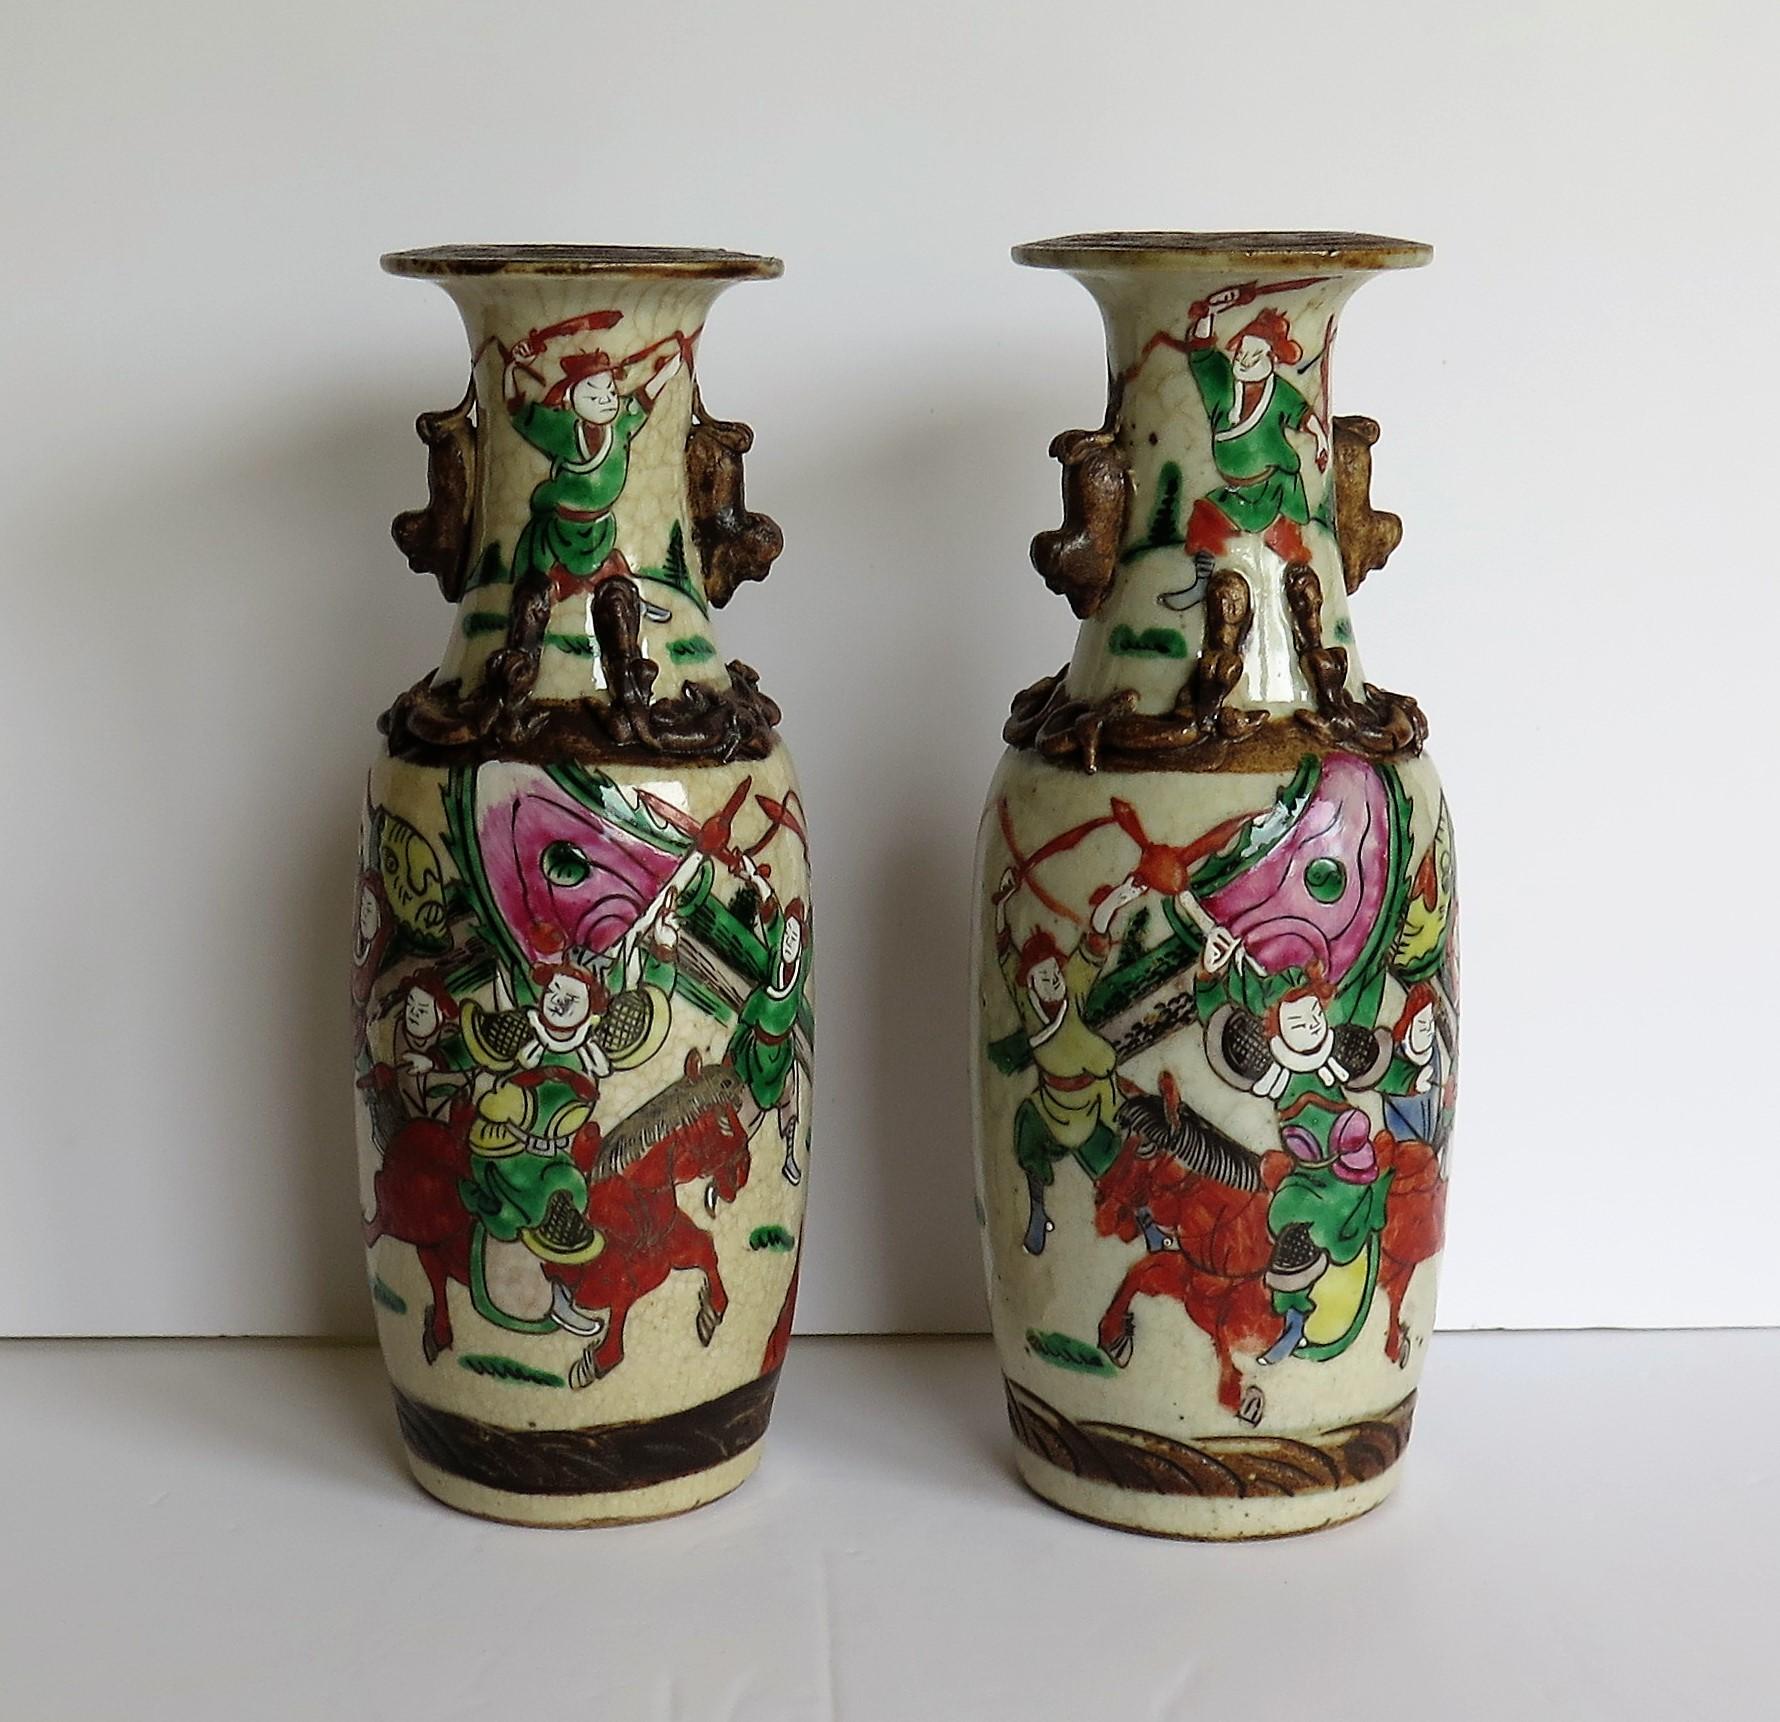 This is a good pair of Chinese crackle glaze ceramic vases with hand painted warrior scenes dating to the late 19th century, circa 1900.

Both vases have a baluster shape with a flared rim and are embellished to the neck with two foo dog handles and